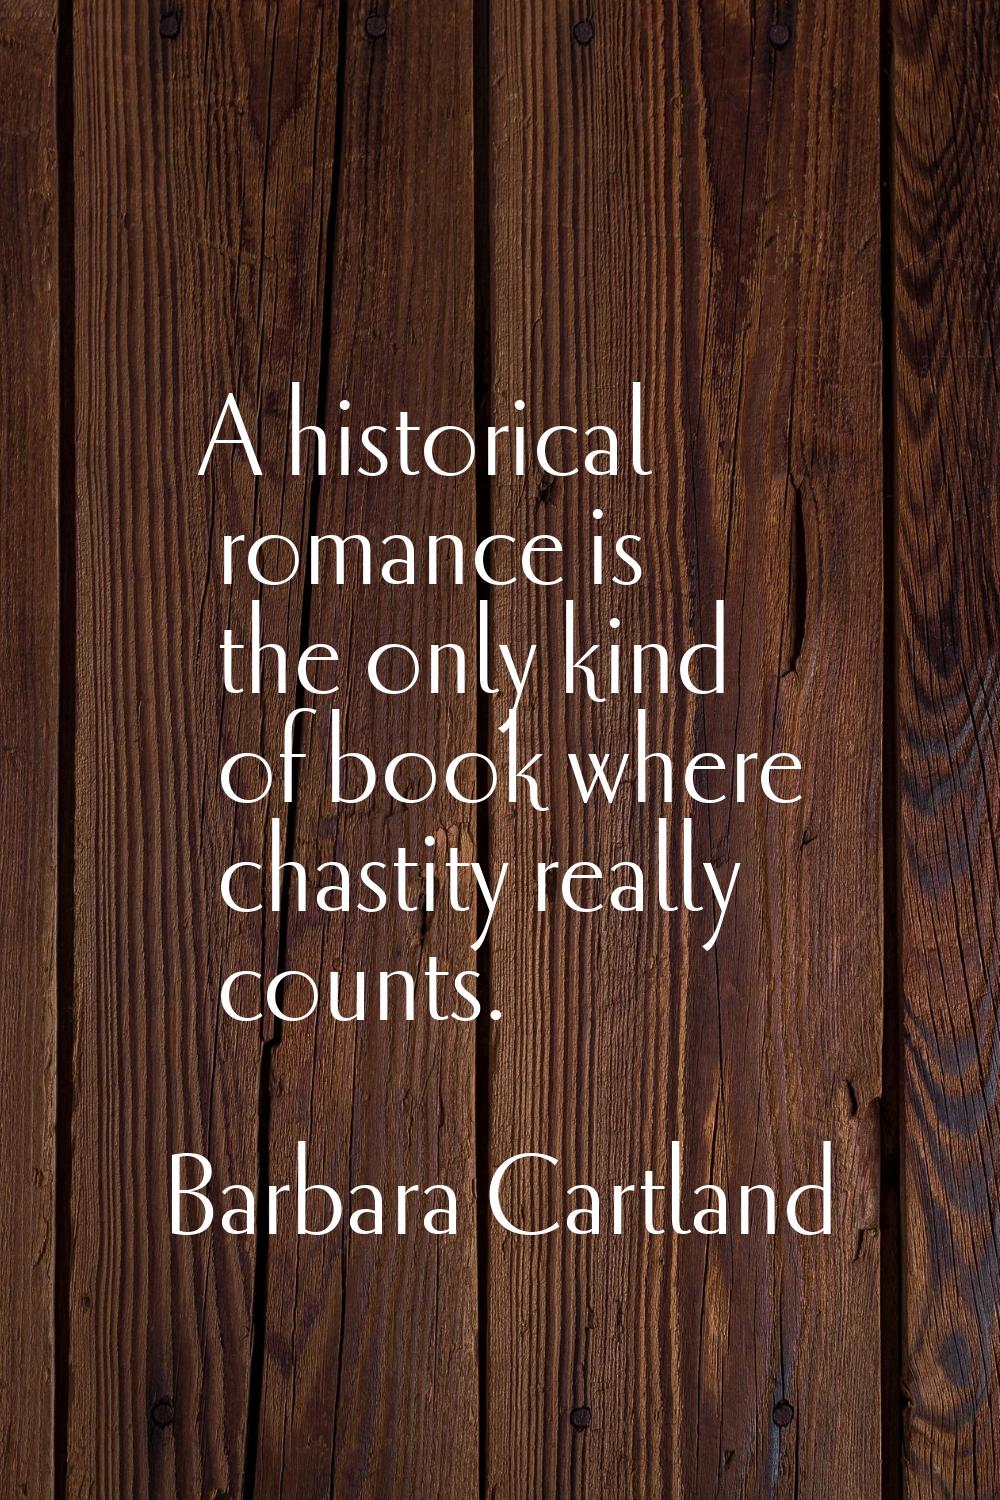 A historical romance is the only kind of book where chastity really counts.